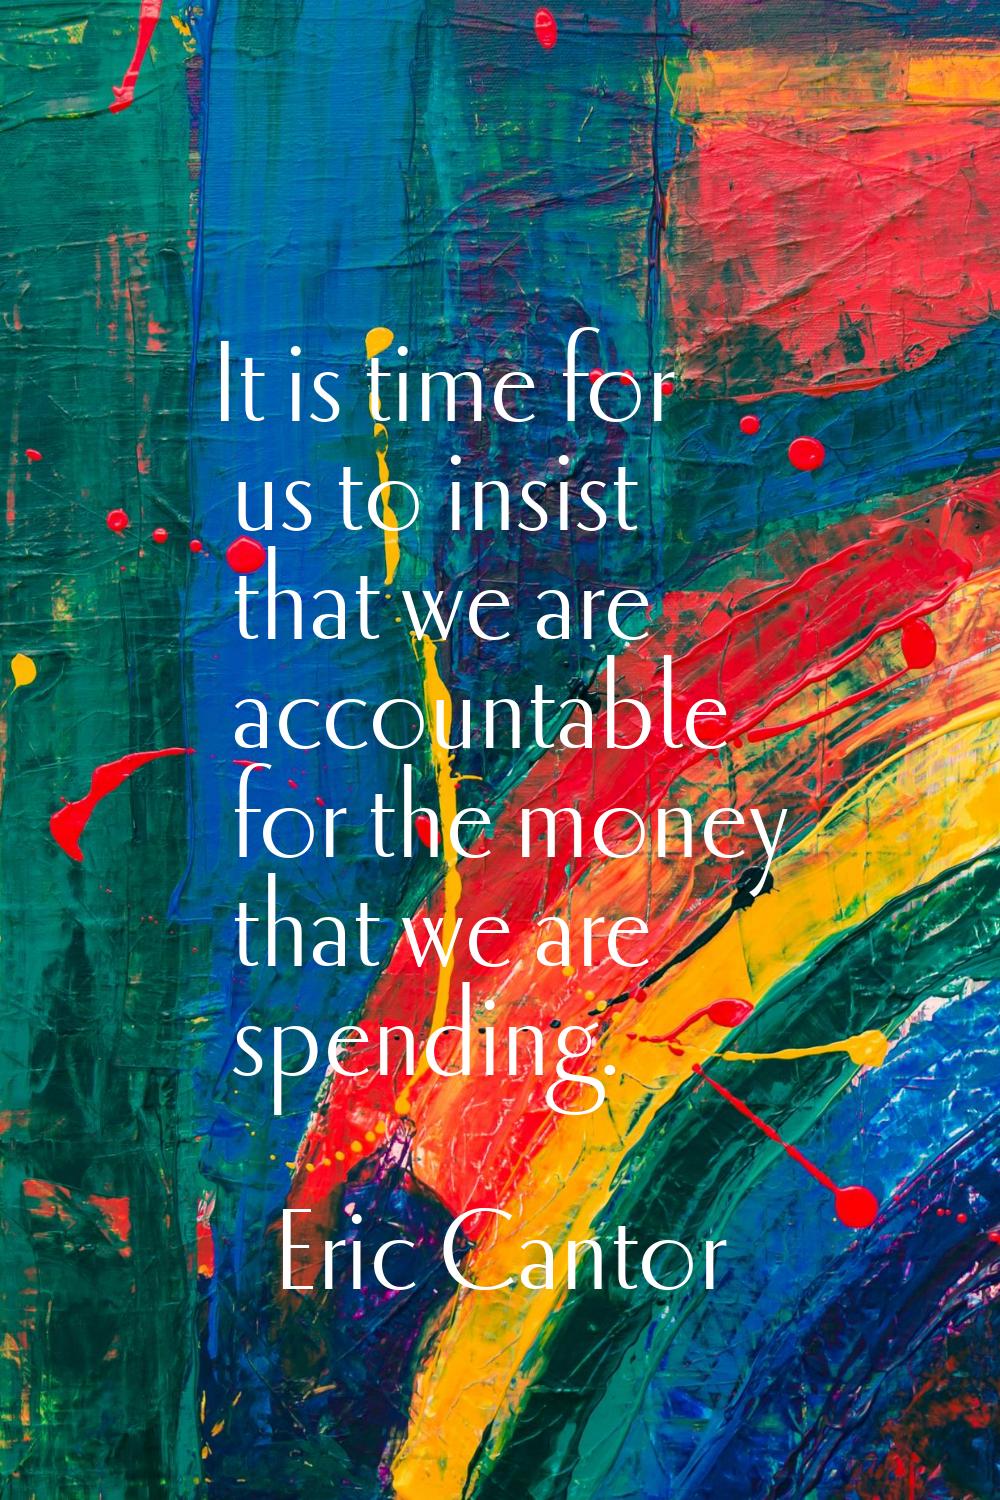 It is time for us to insist that we are accountable for the money that we are spending.